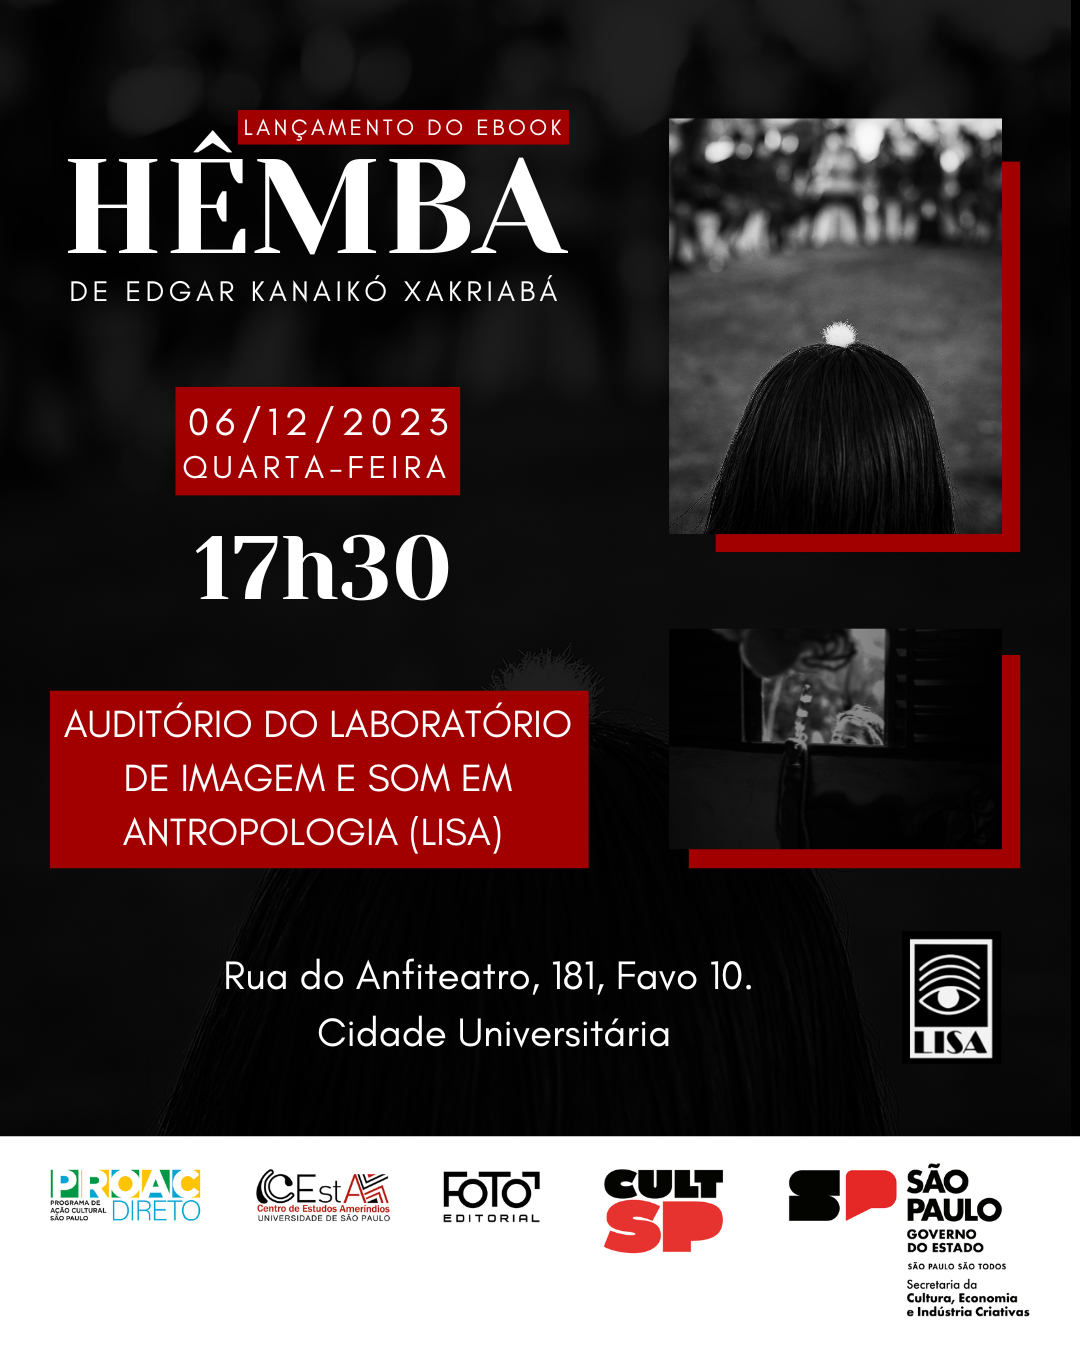 Launch of the Hêmba E-book